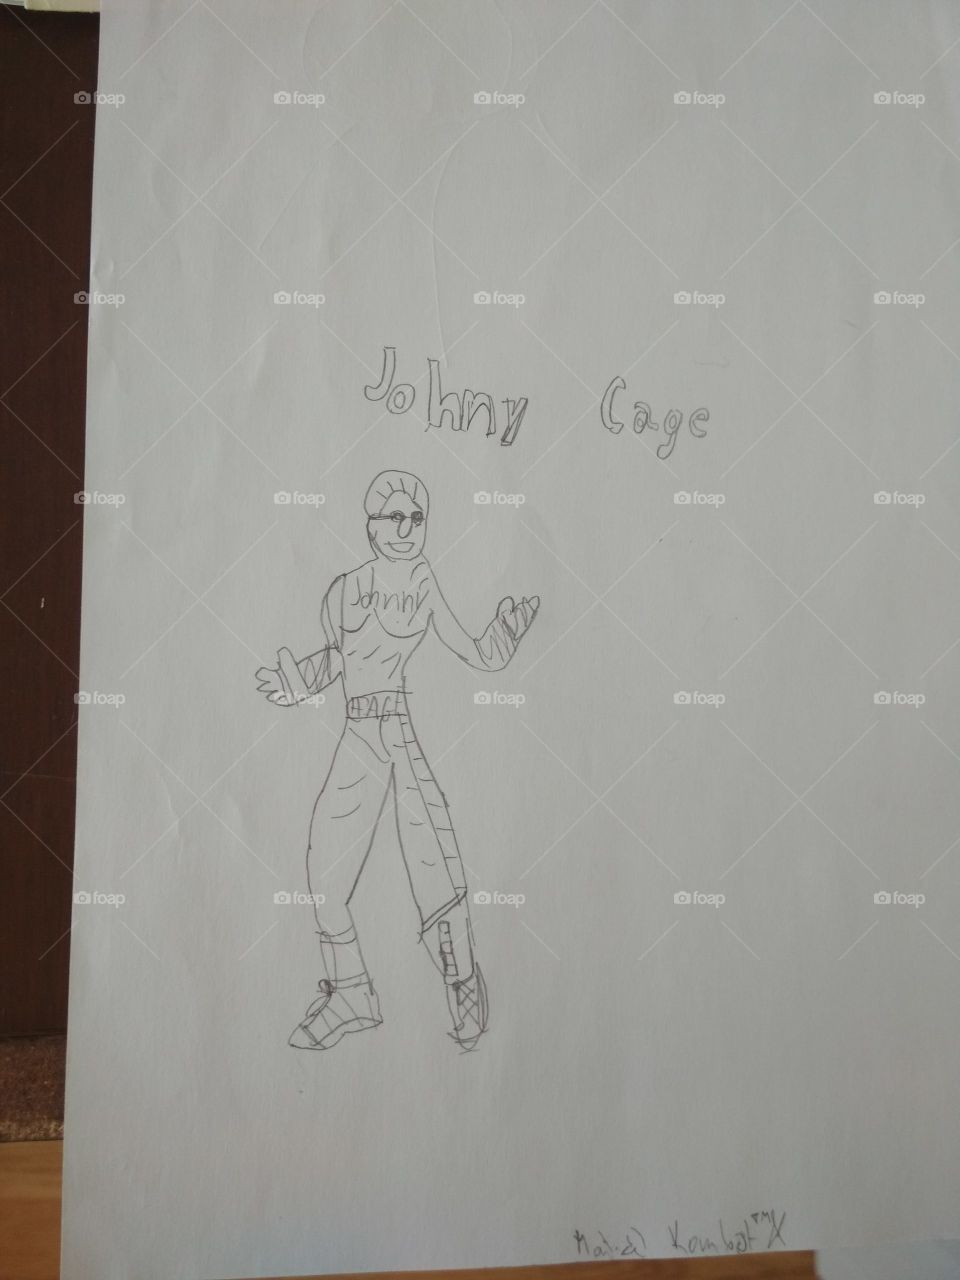 Johnny cage